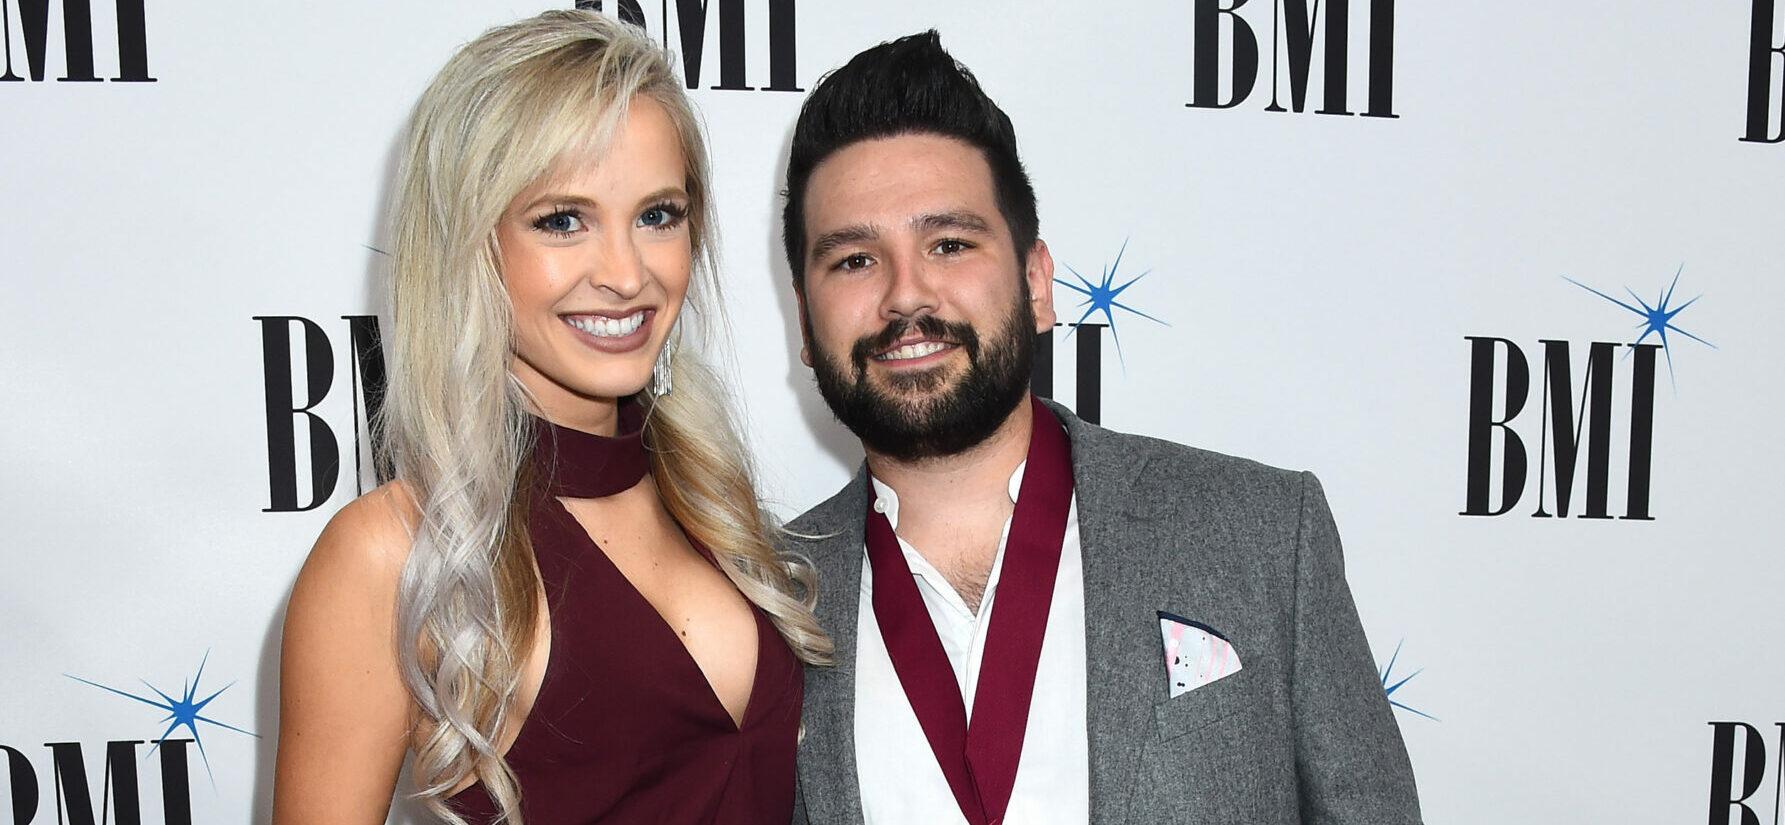 Dan + Shay Star Shay Mooney Flaunts His Shirtless Body After His 50-Pound Weight Loss: ‘Just Consistency’